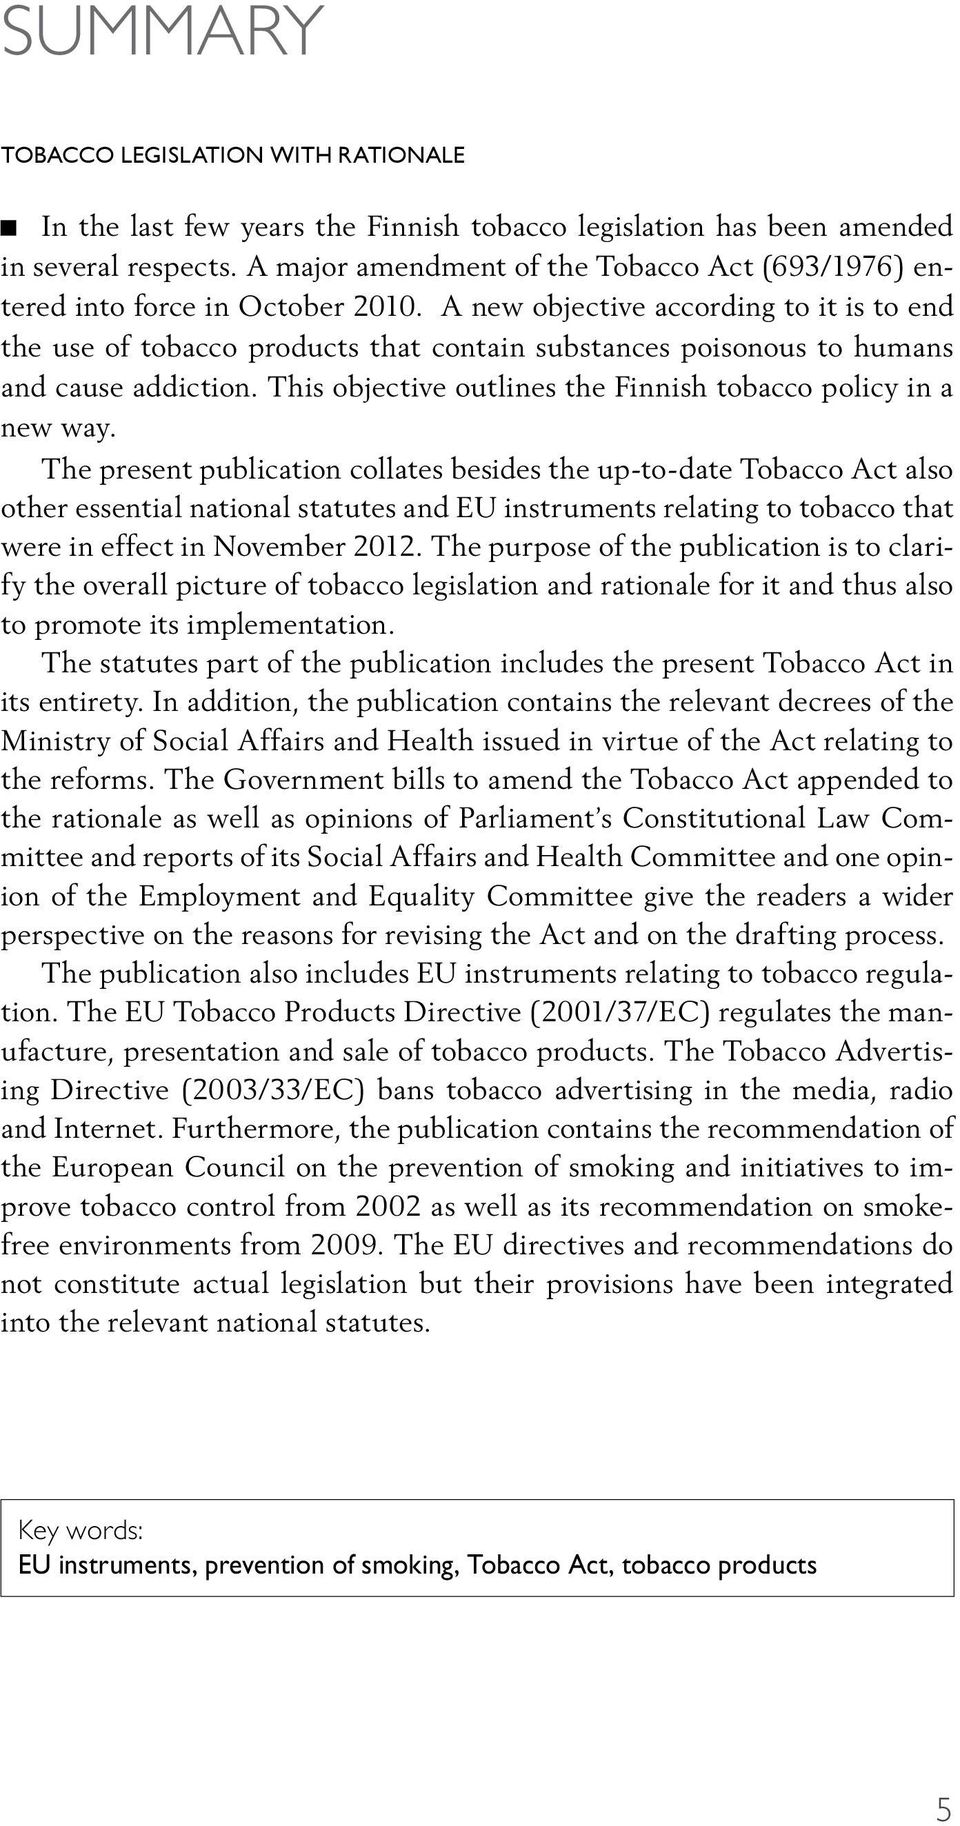 A new objective according to it is to end the use of tobacco products that contain substances poisonous to humans and cause addiction. This objective outlines the Finnish tobacco policy in a new way.